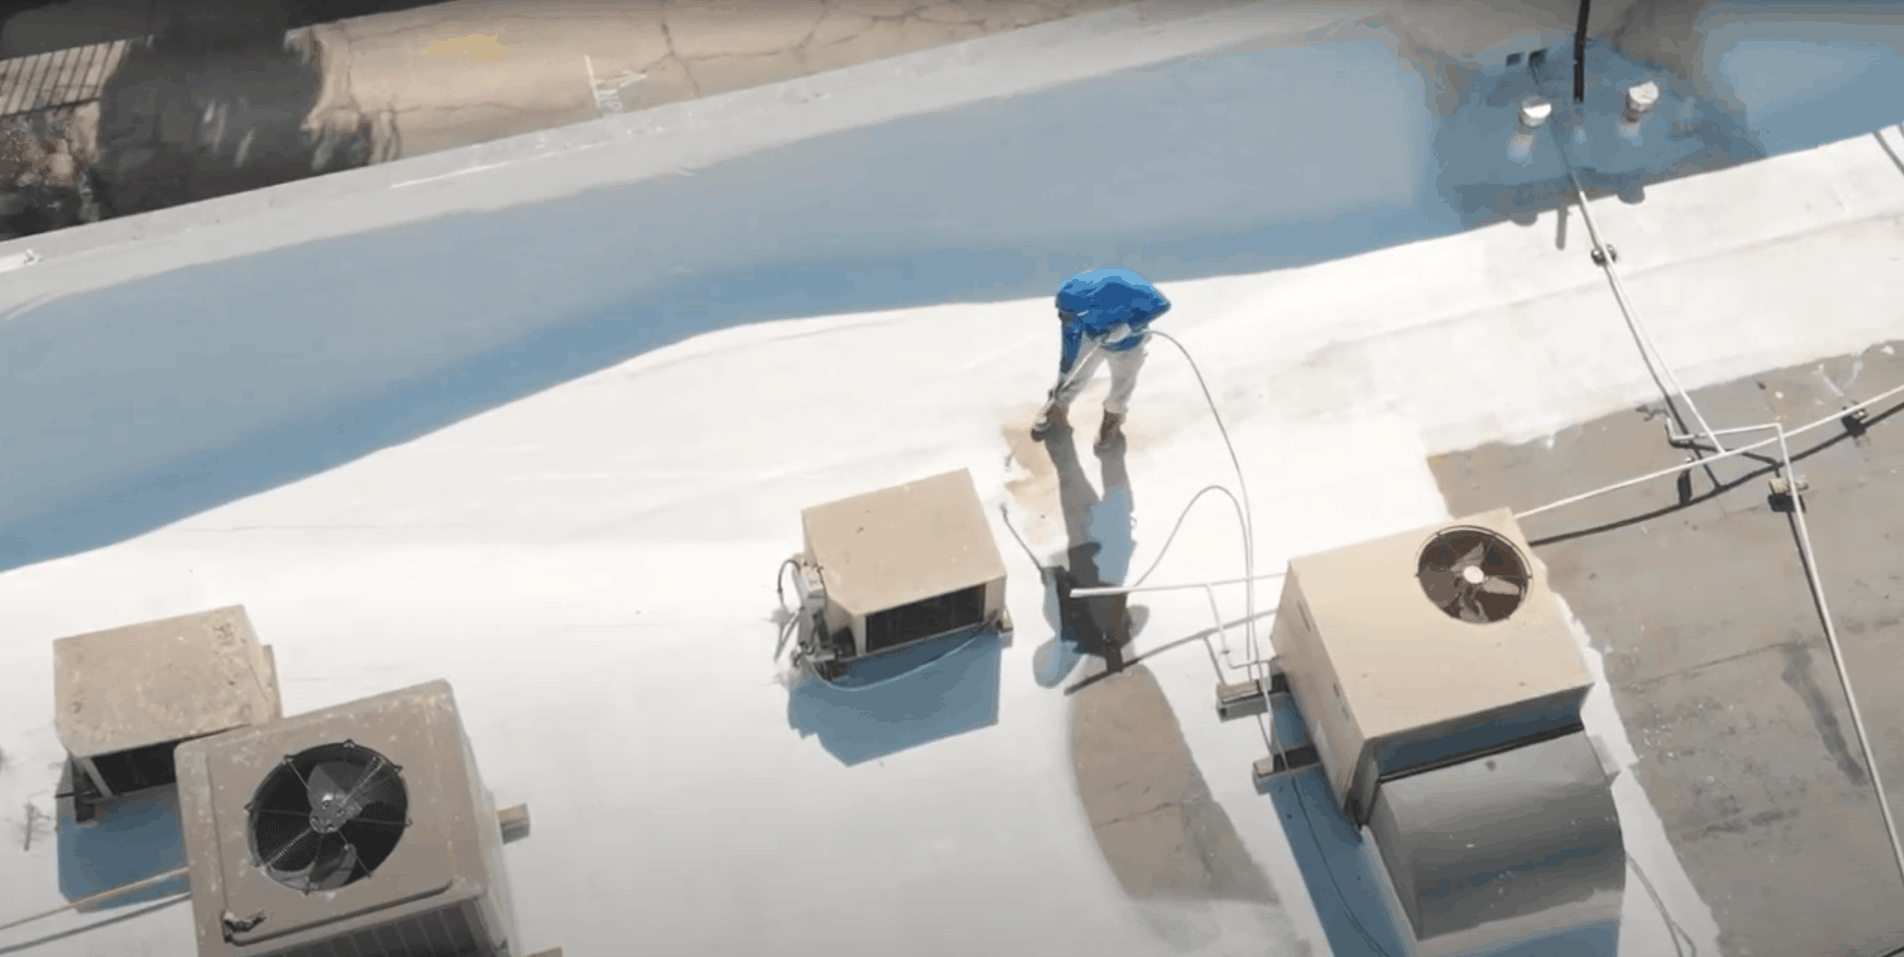 Installing Roof Coatings in Cold Weather